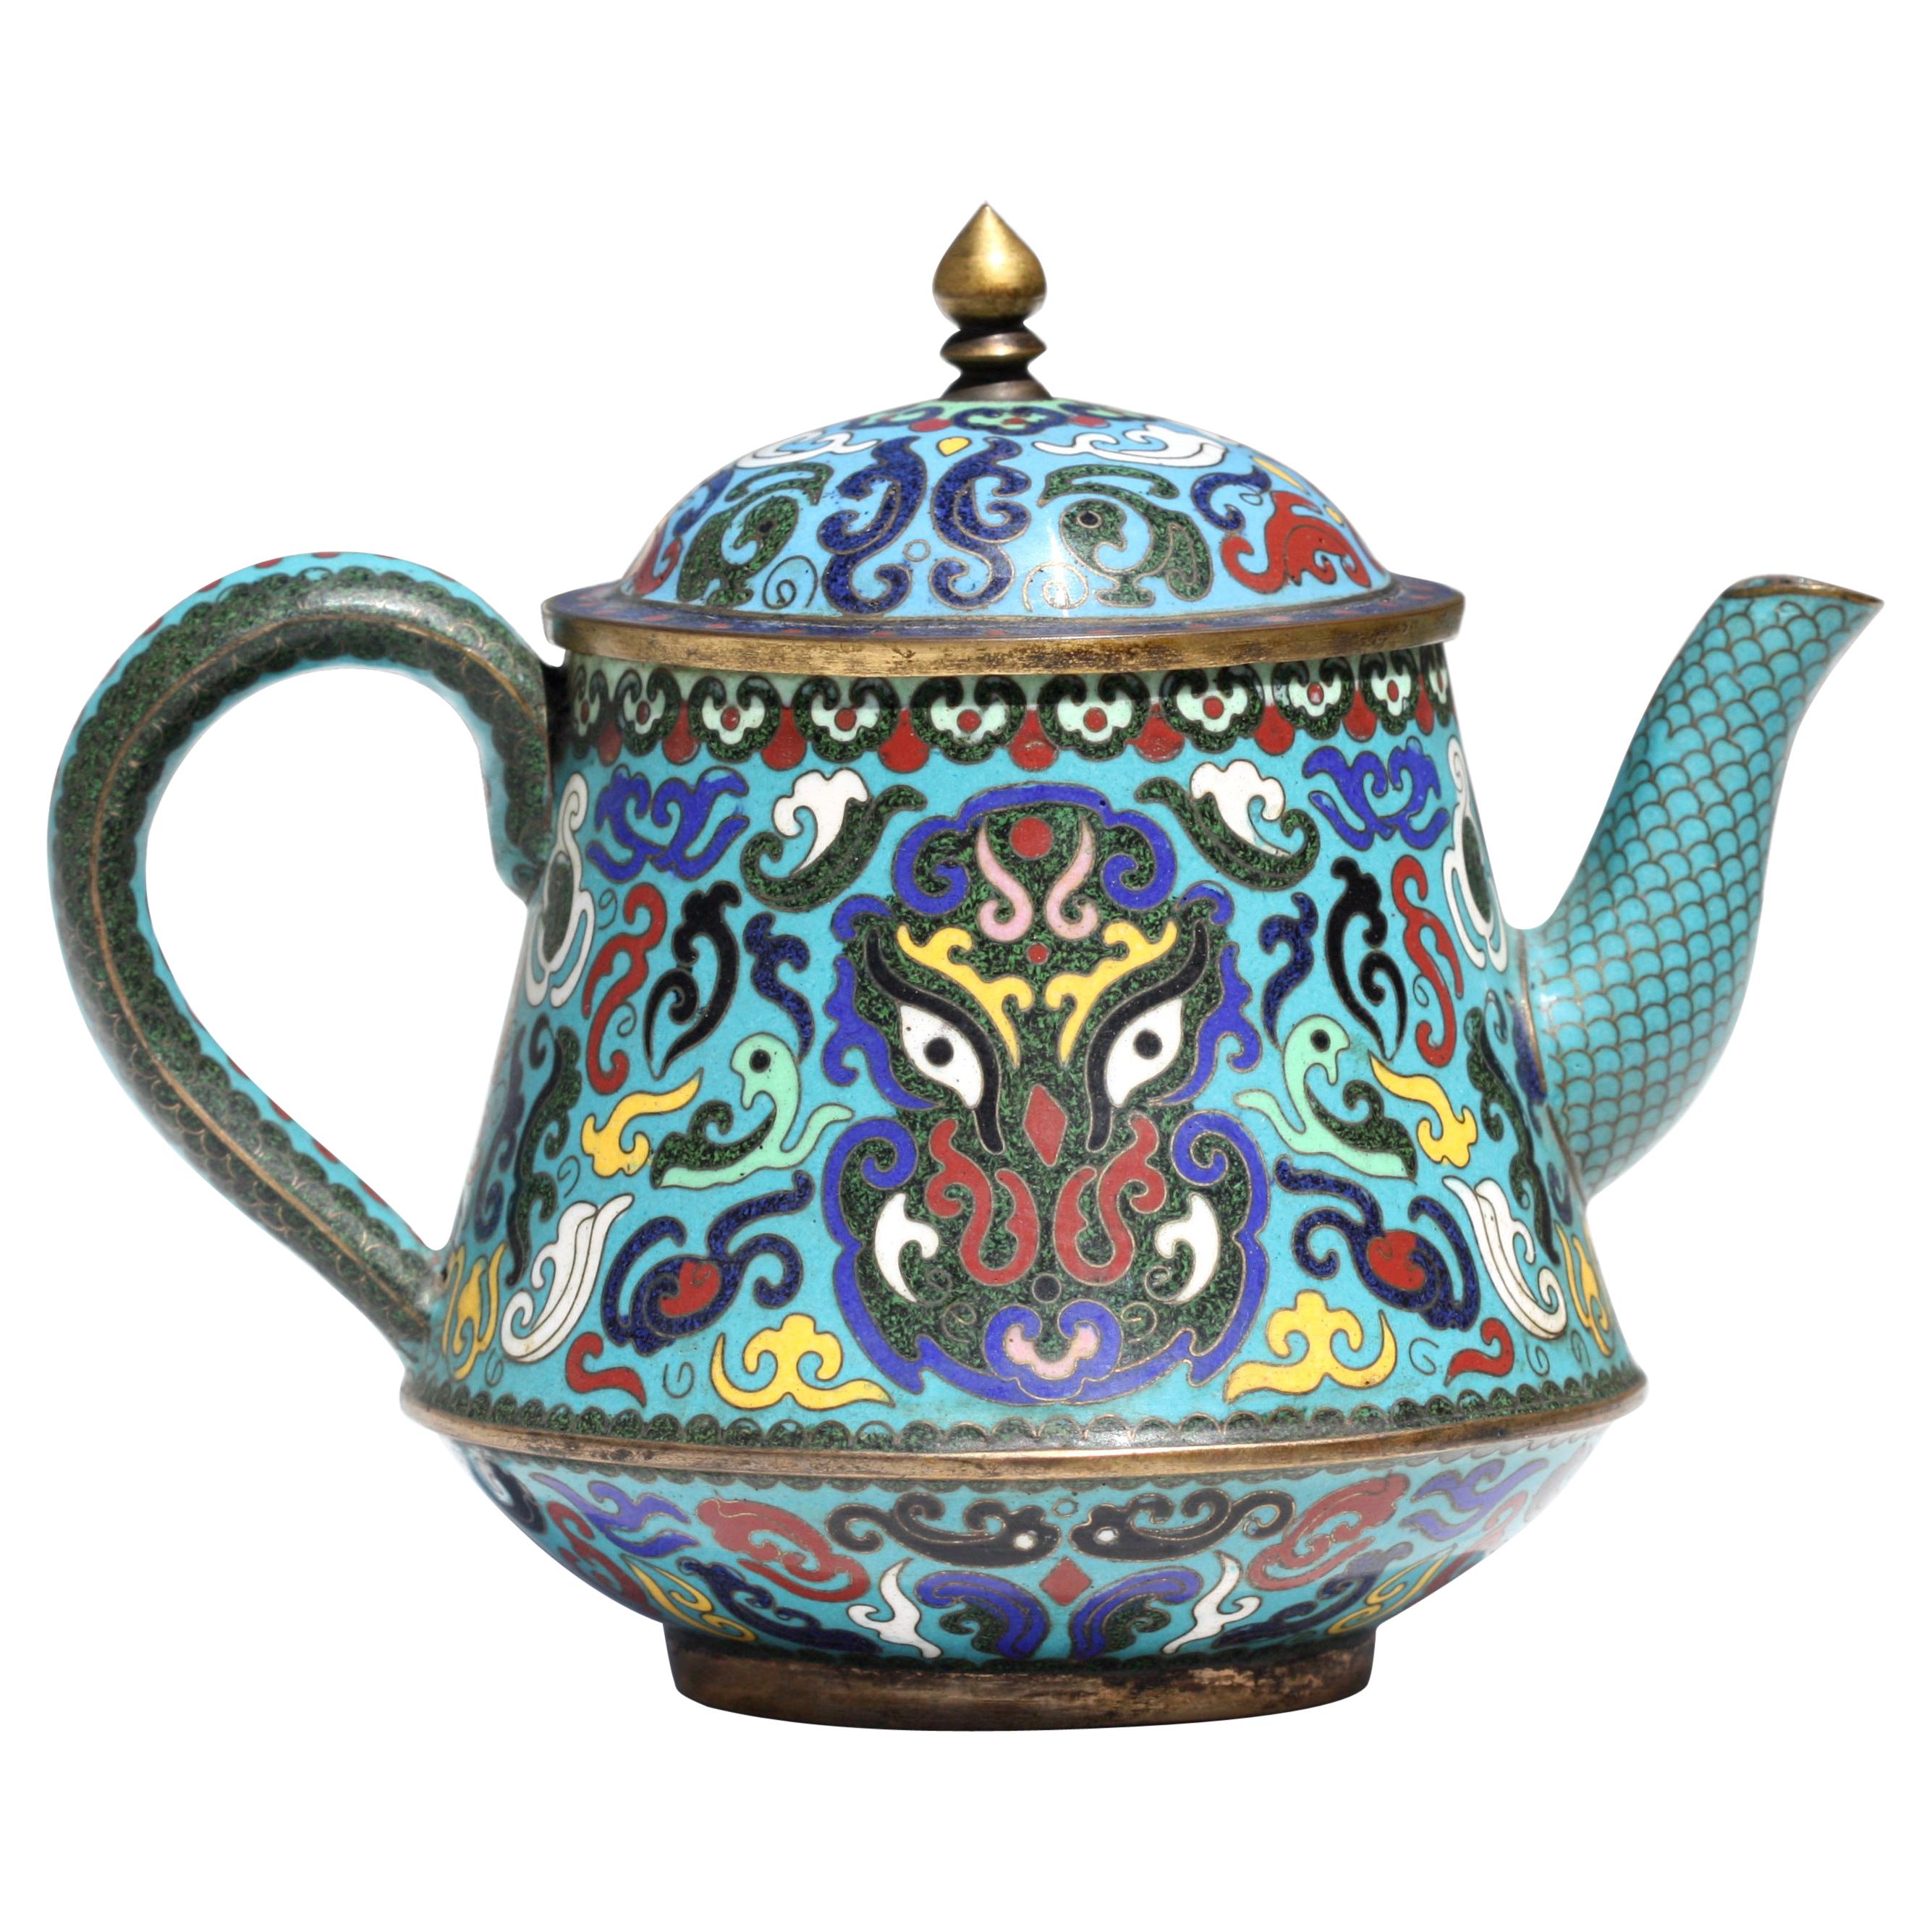 Chinese Cloisonné Enamel Teapot and Cover, 20th Century